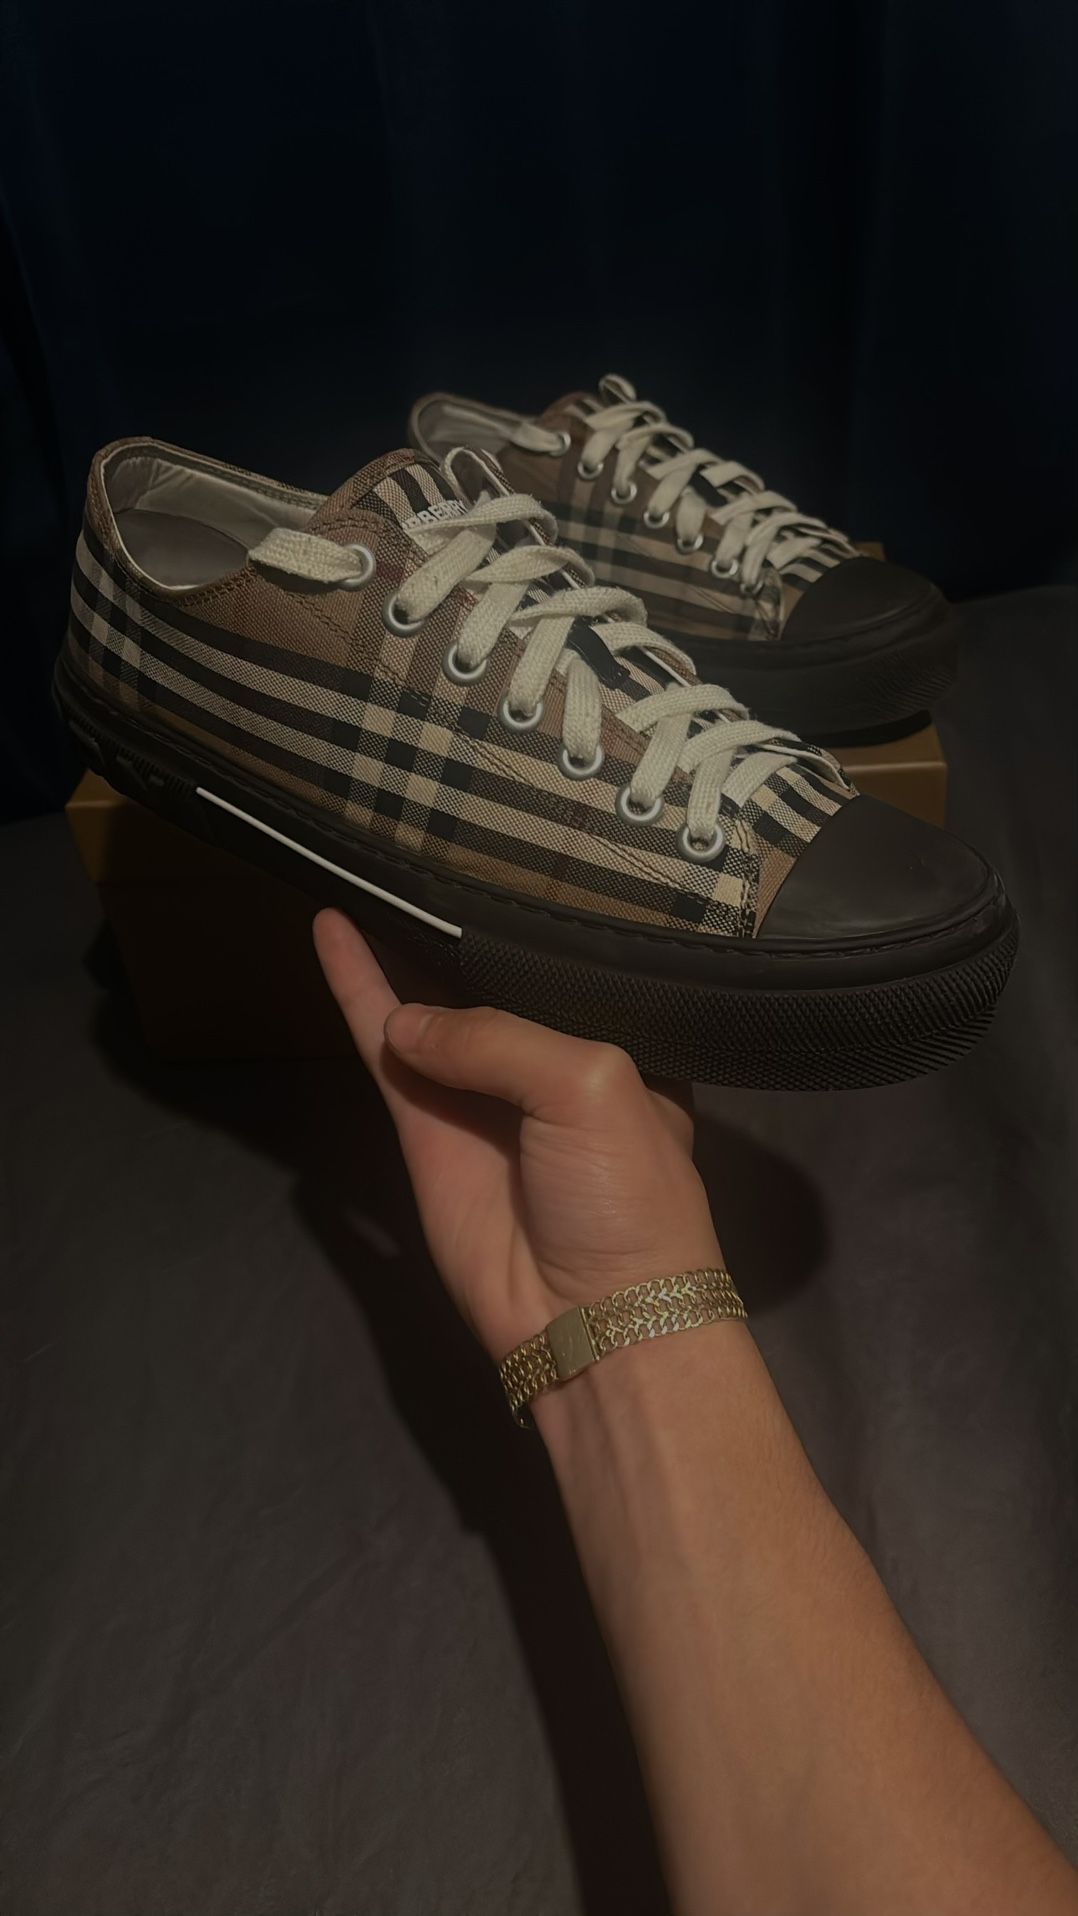 Burberry Size 10 (43) 